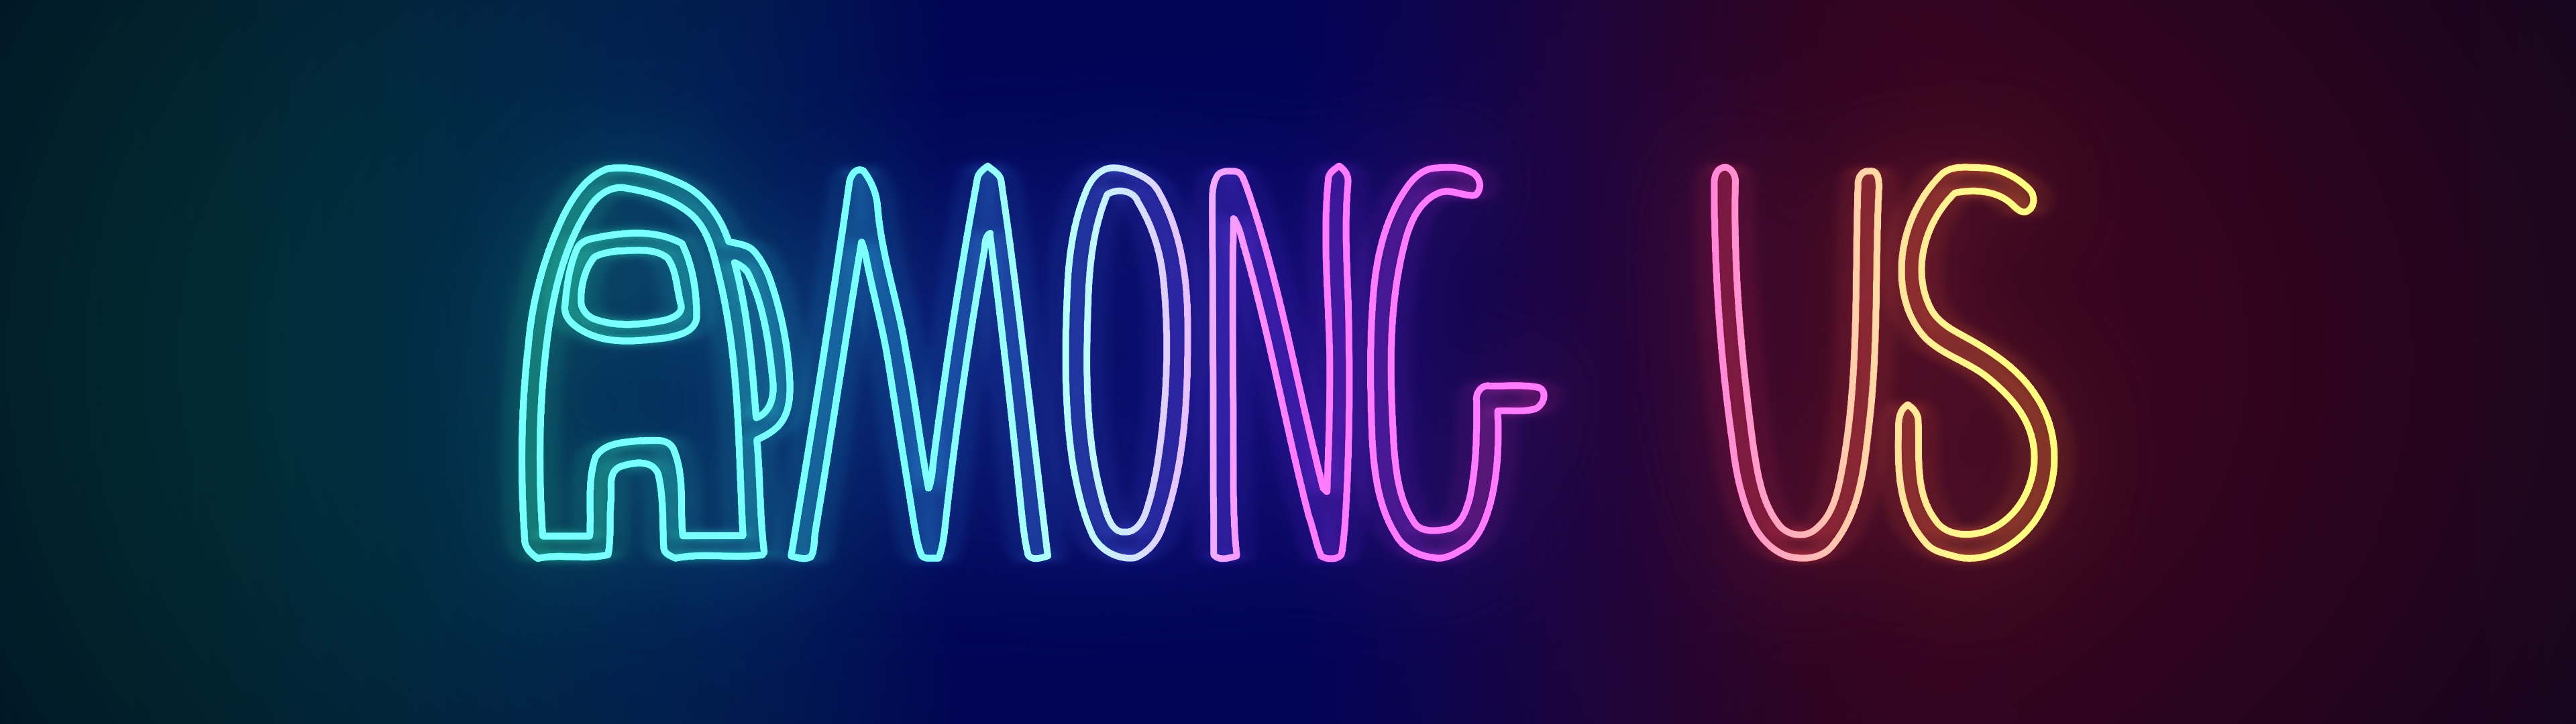 Among Us Wallpaper 4K, Neon, iOS Games, Android games